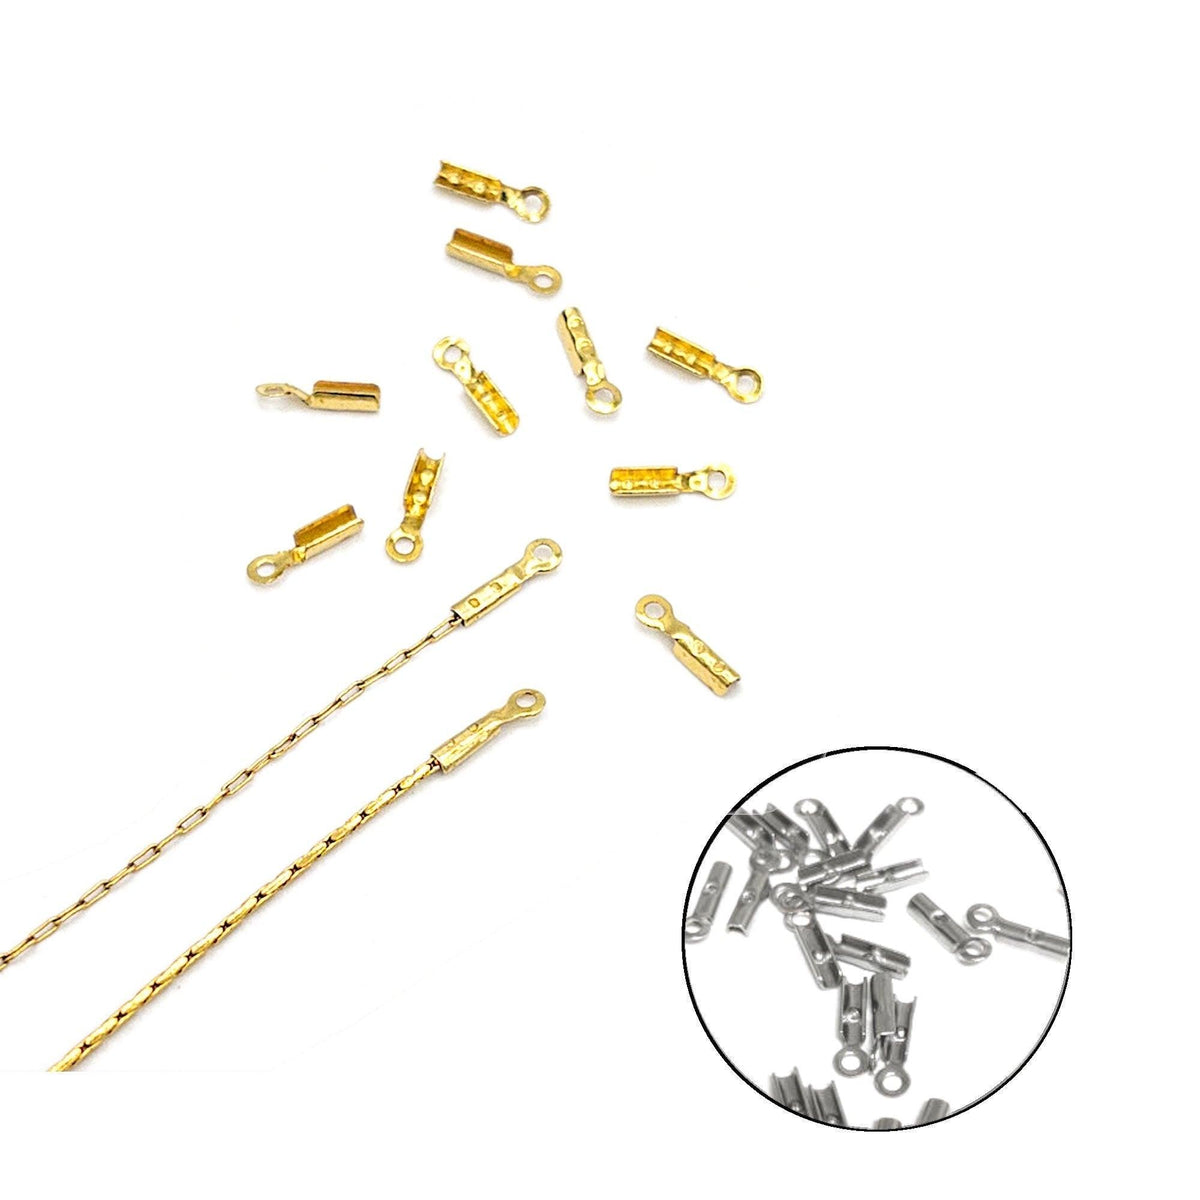 Gold Cord with Tassels as low as $2.99, buy Cords from our store